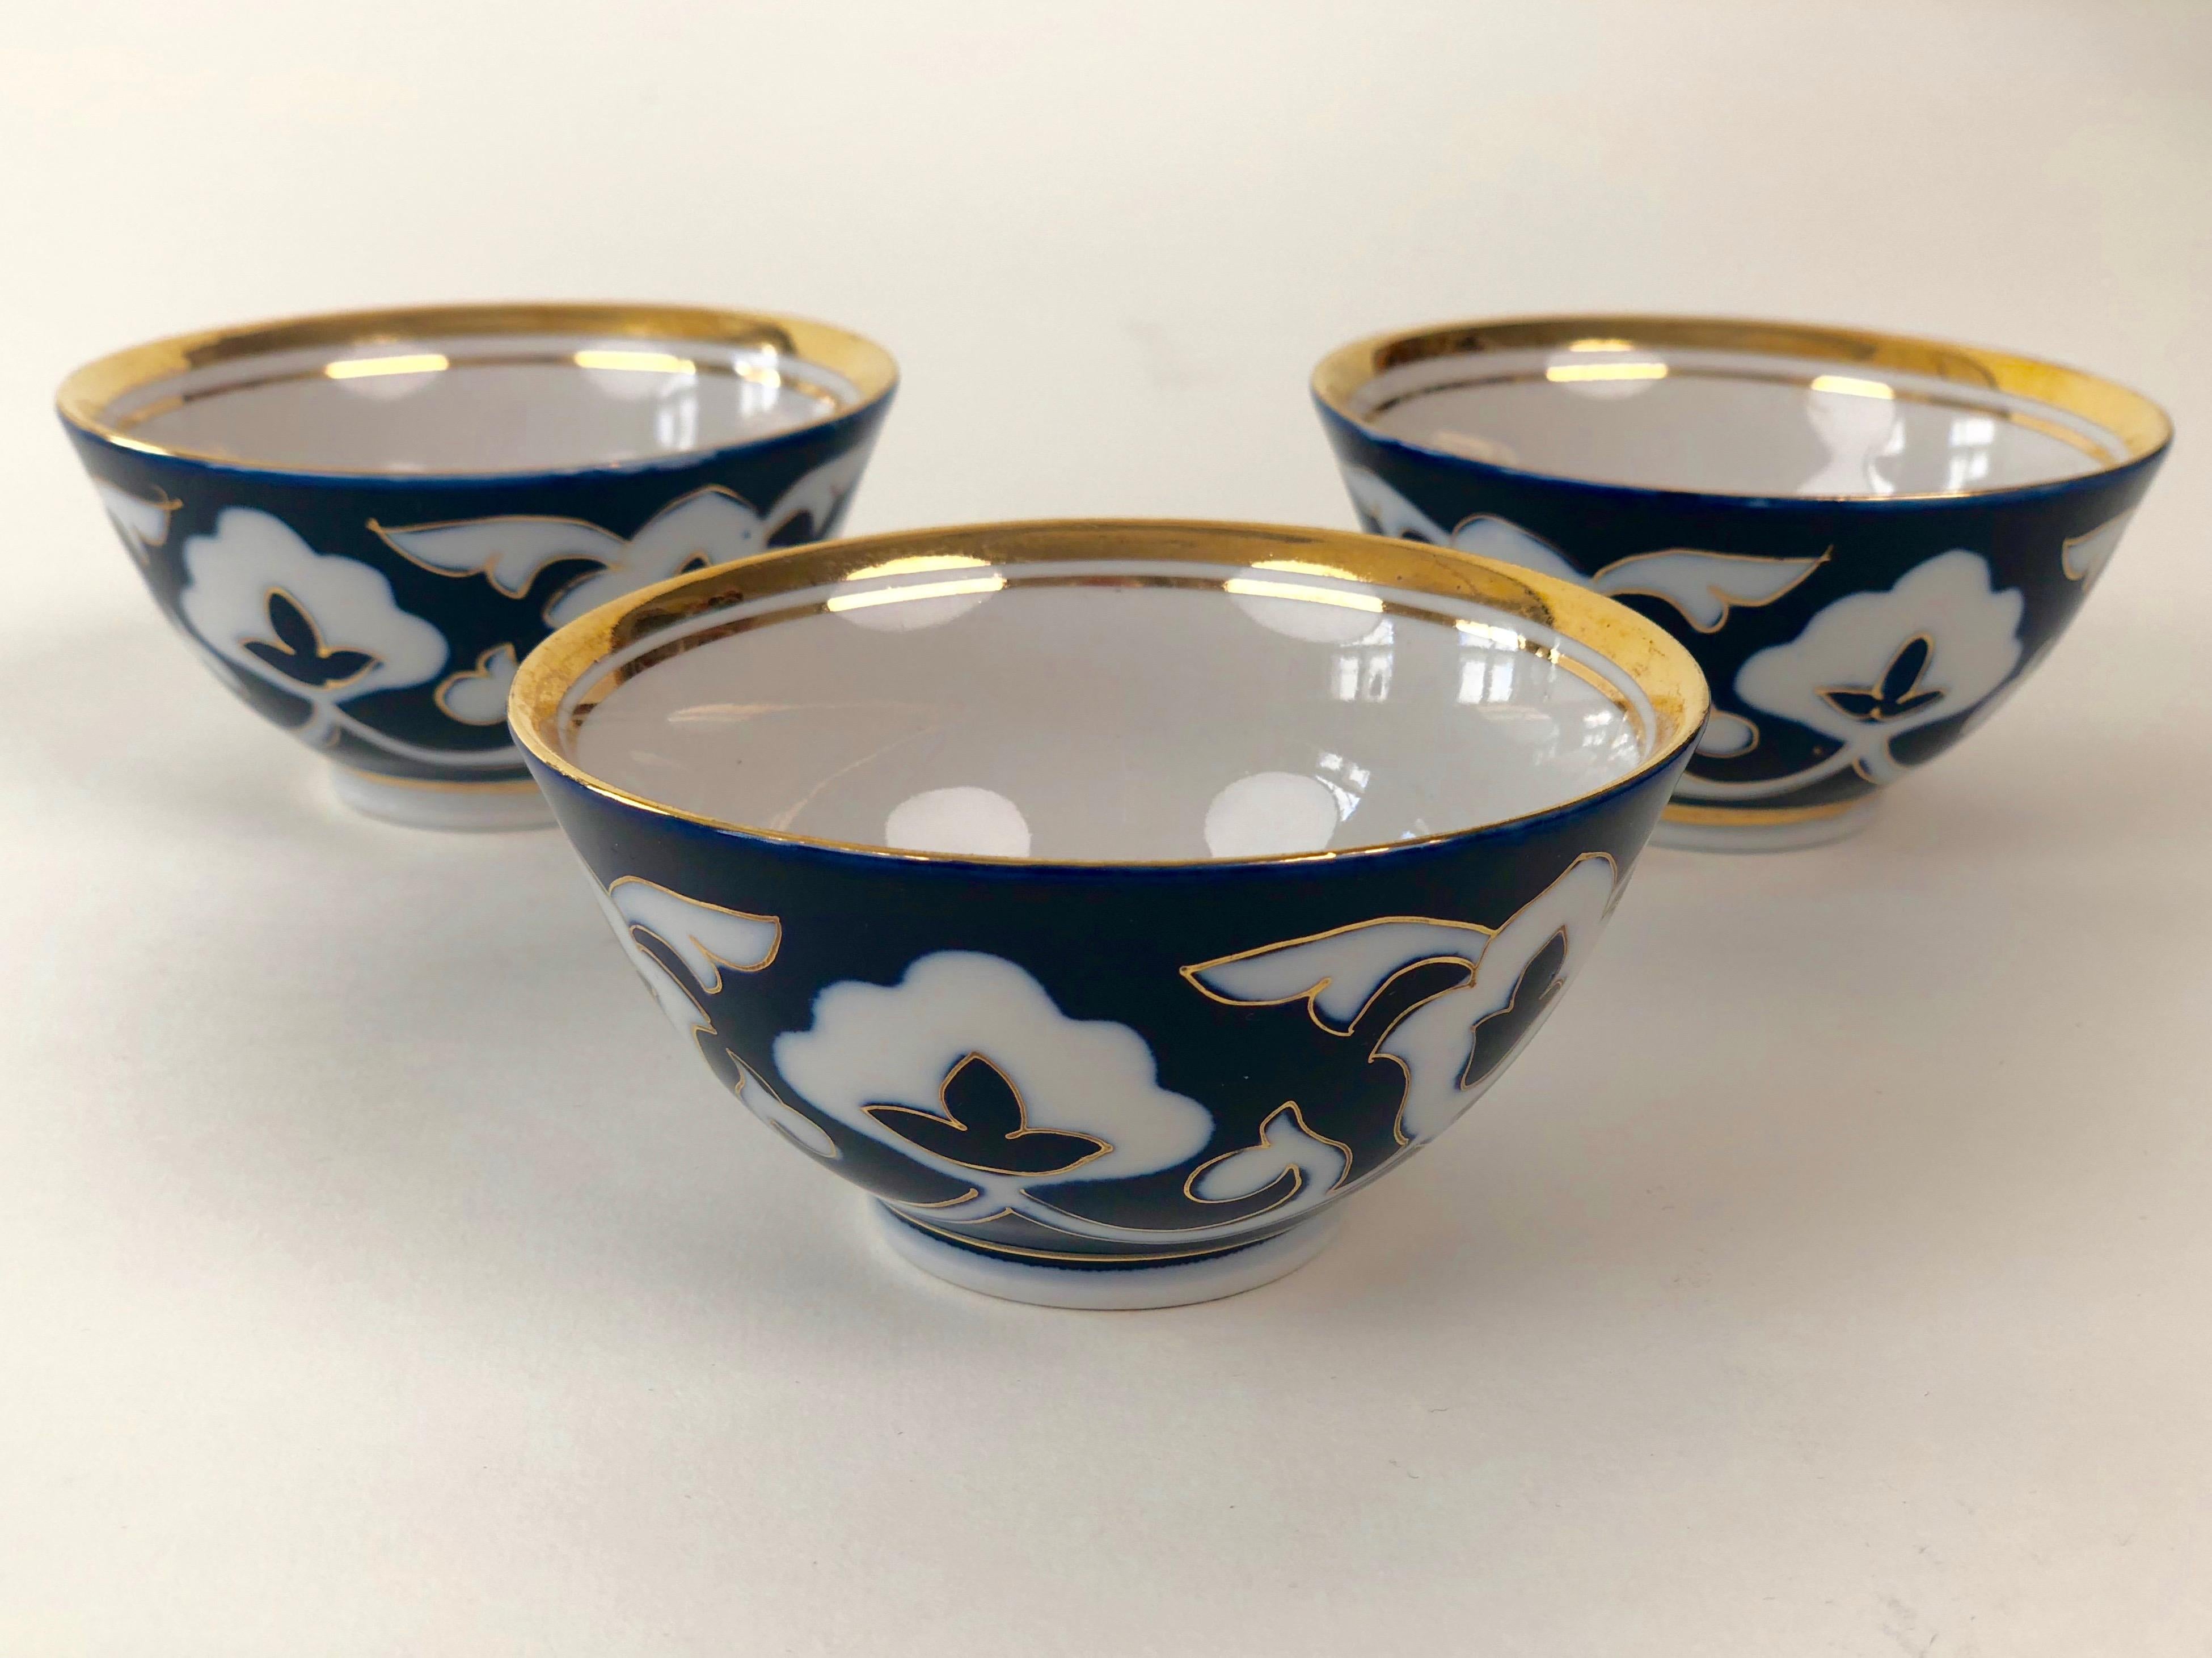 Hand Painted Porcelain Tea Set from Central Asia in Kobalt Blue & Gold In Excellent Condition For Sale In Vienna, Austria